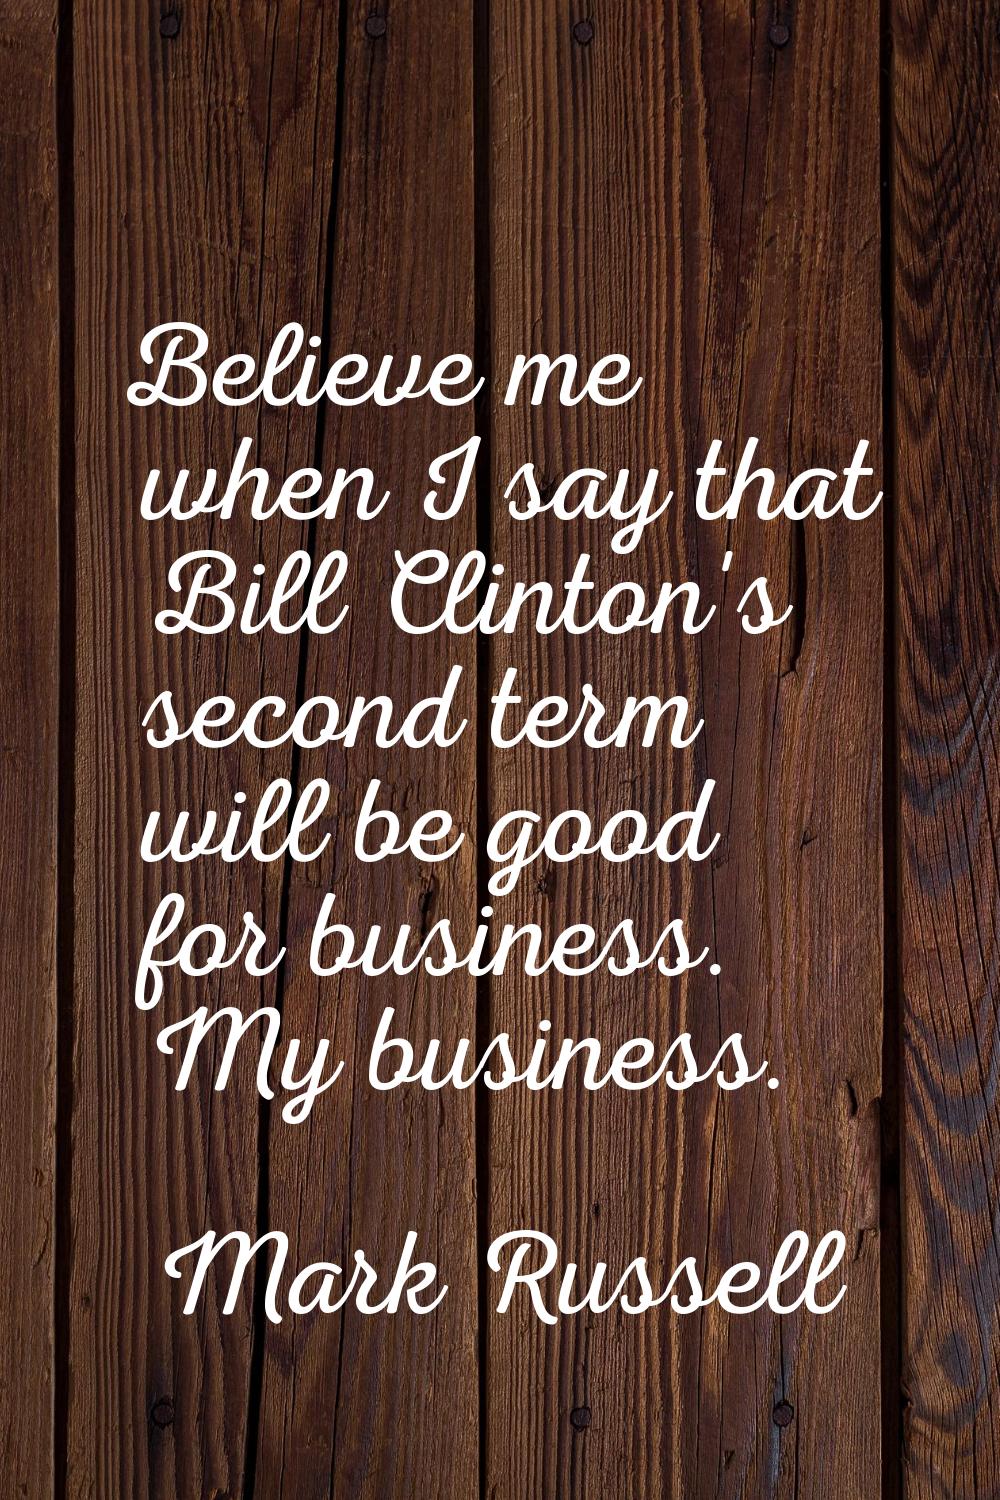 Believe me when I say that Bill Clinton's second term will be good for business. My business.